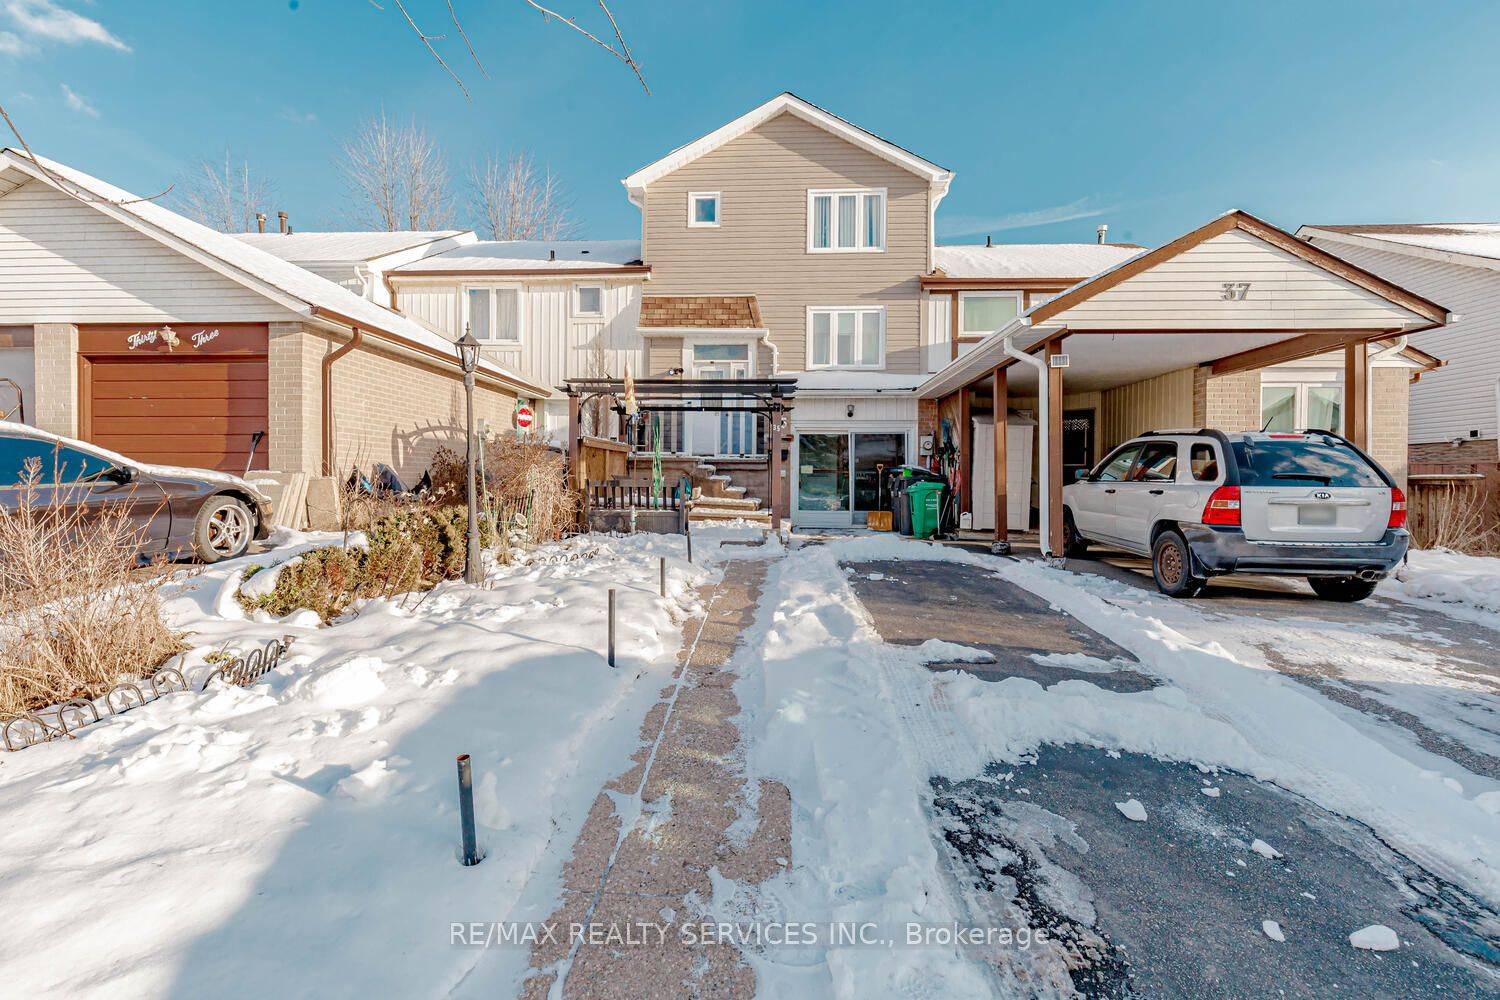 Freehold townhome located in much sought after community of Heart Lake.